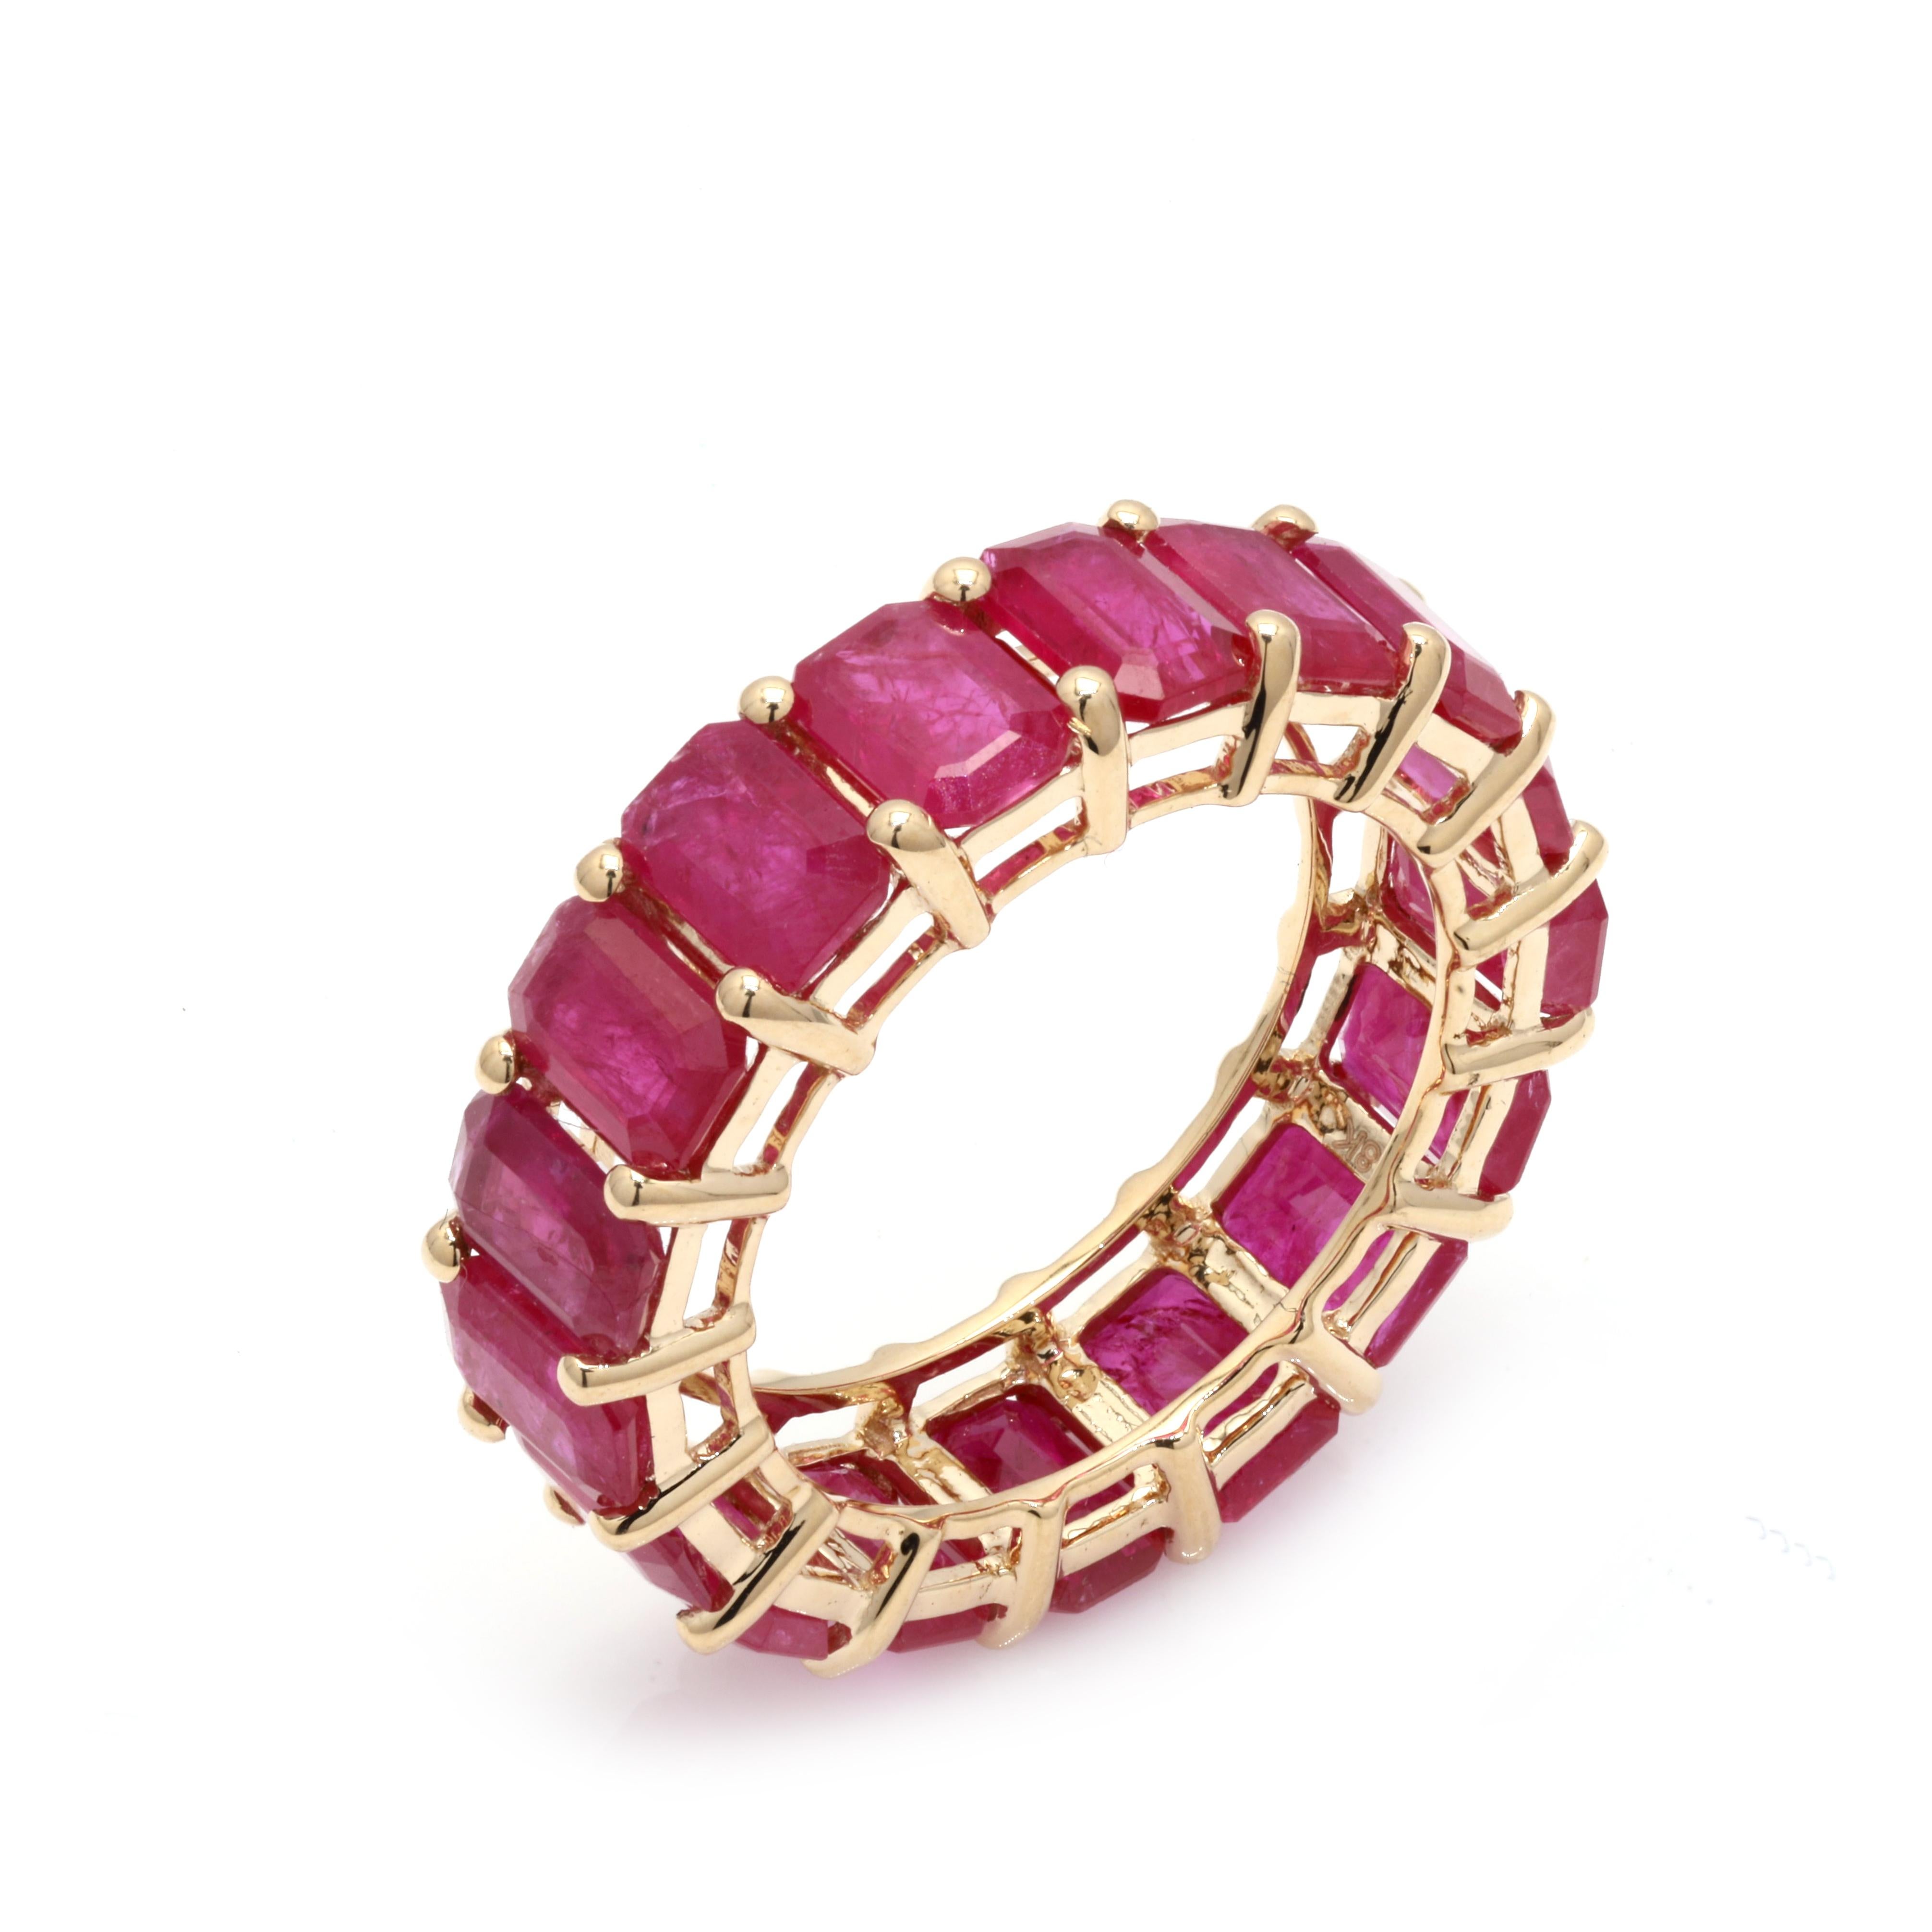 For Sale:  Magnificent 10.91 ct Ruby Eternity Band Ring 14k Yellow Gold Gift for Her 8